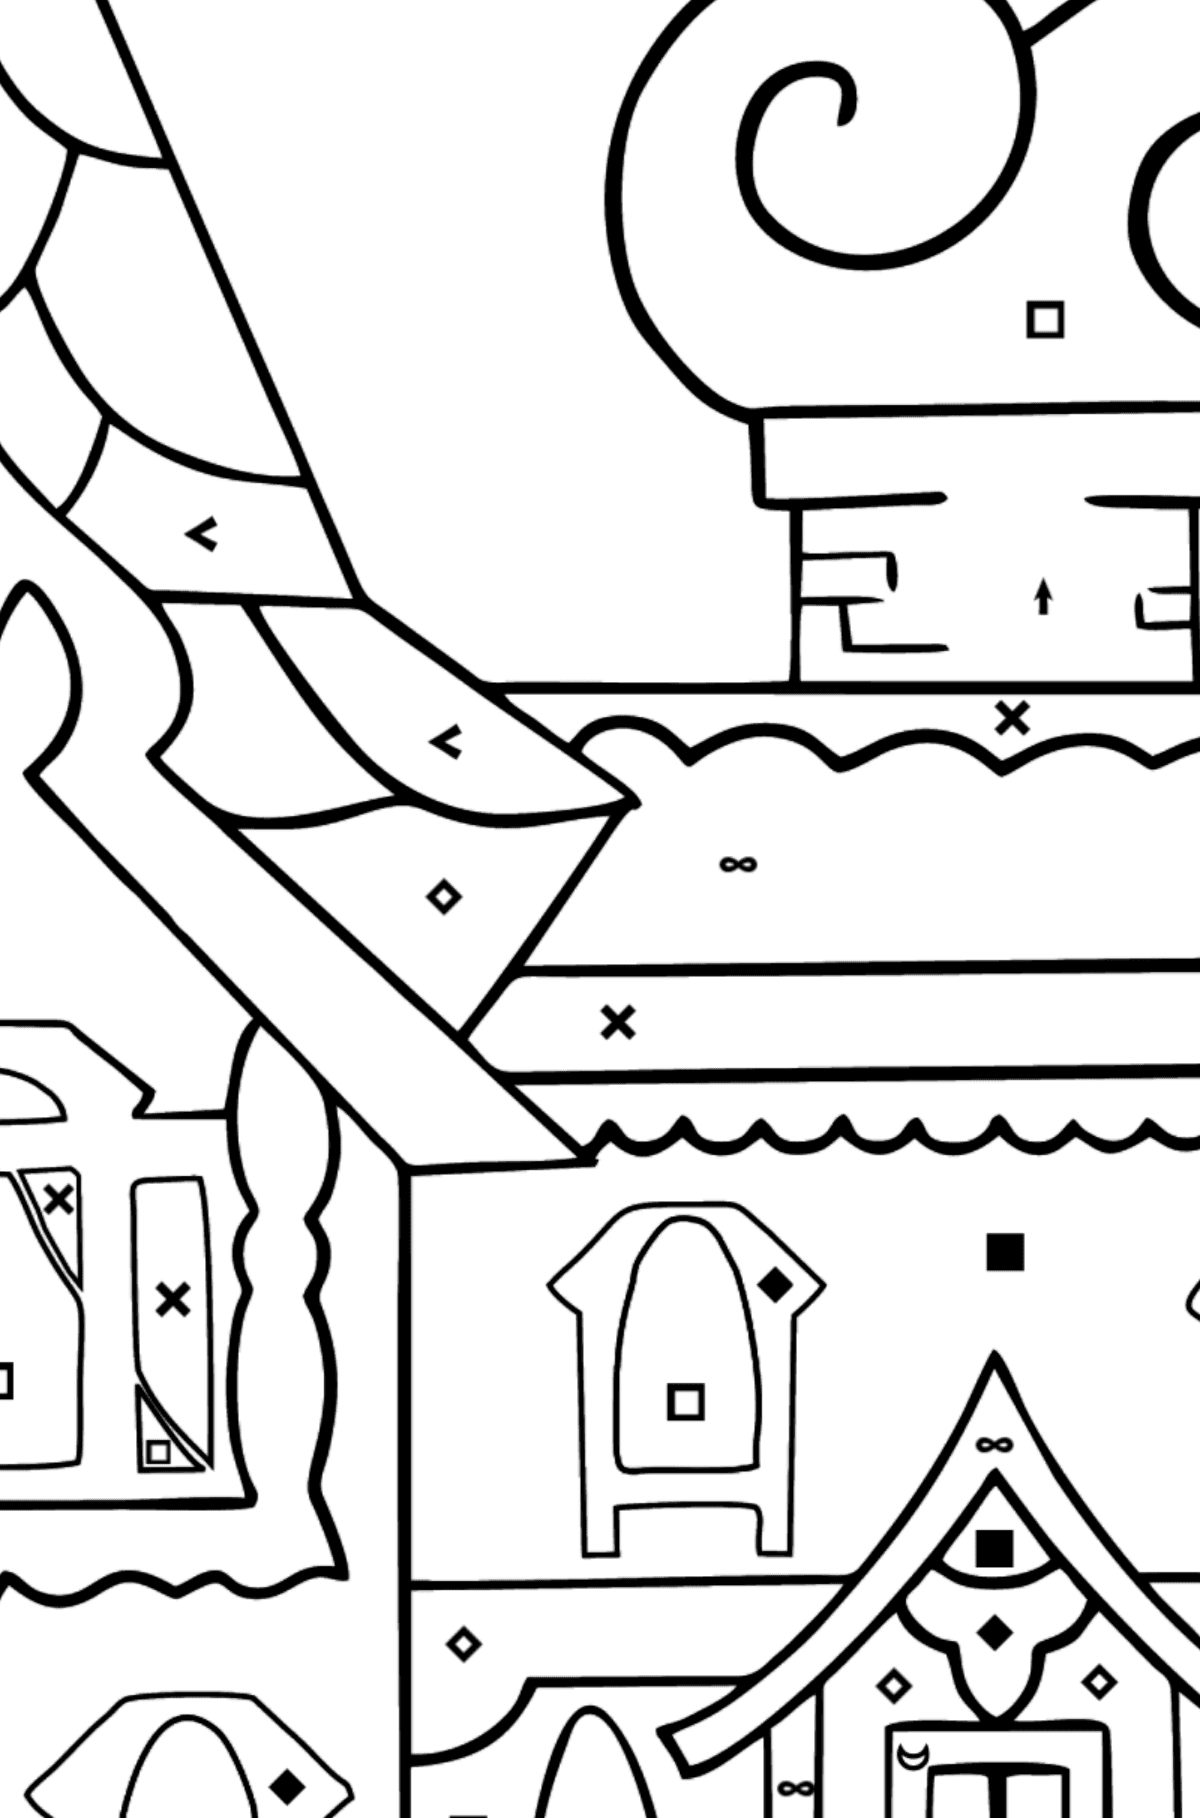 Coloring Page - A House - A Kingdom of Storytellers - Coloring by Symbols for Kids